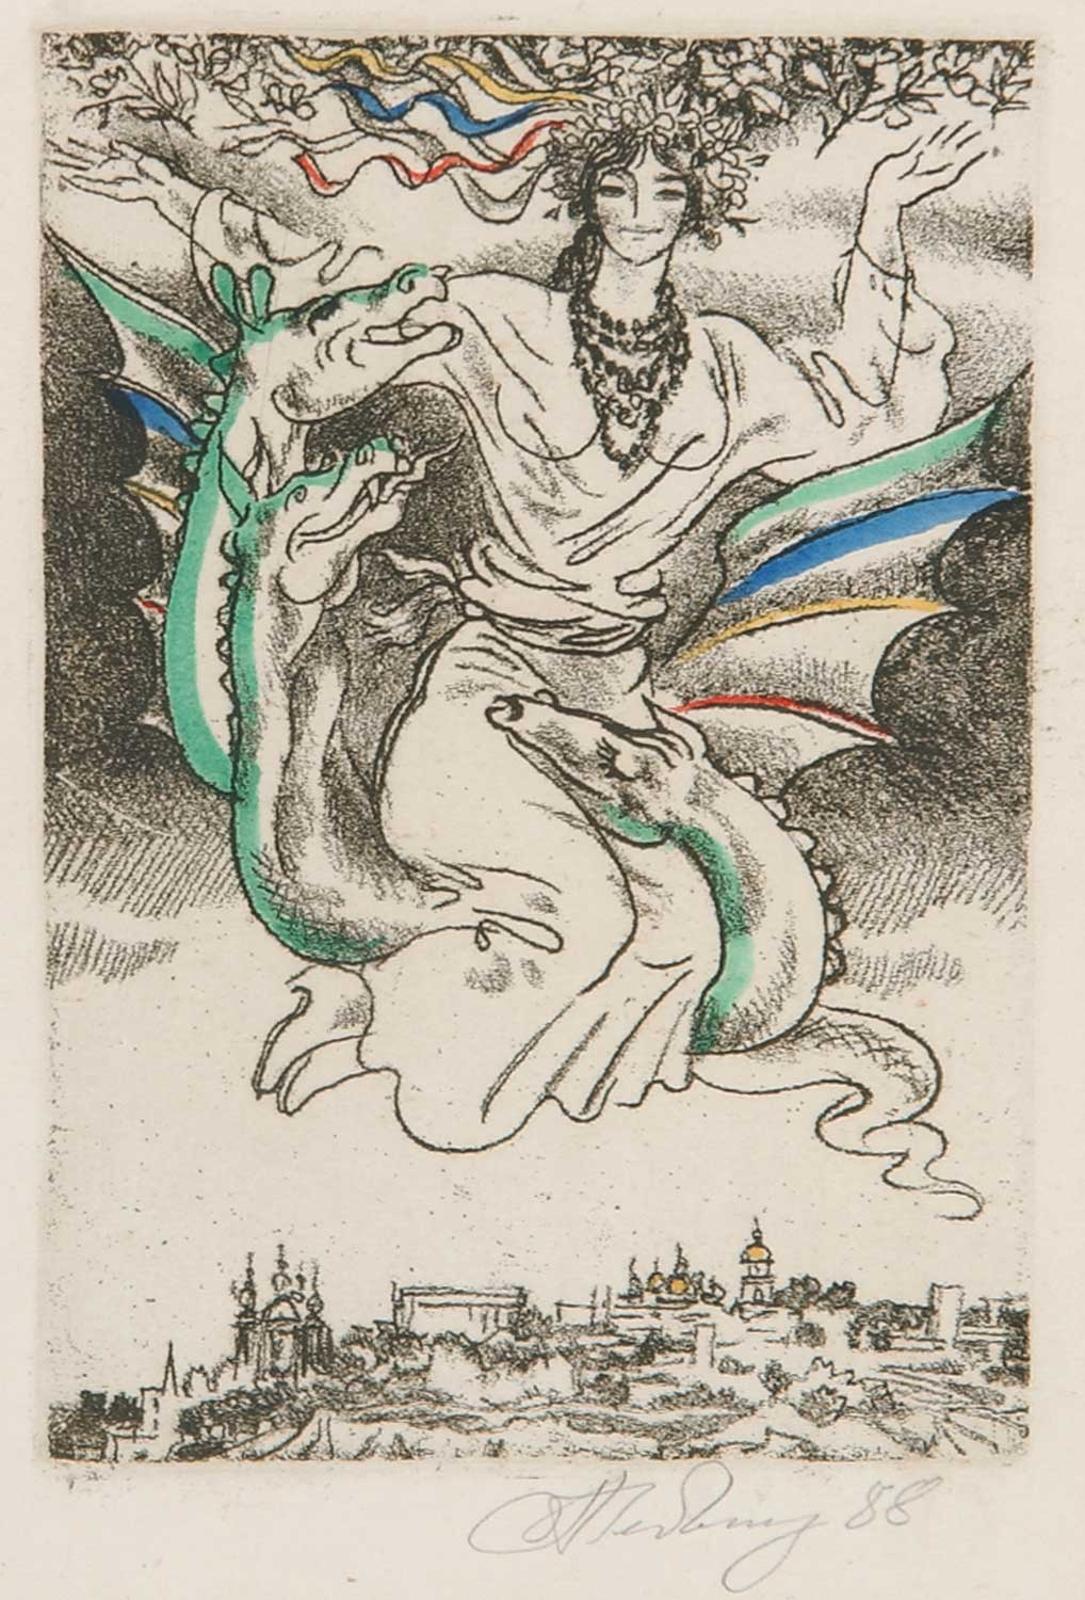 Atributted Ludmilla Temertey - Untitled - A Girl with Dragons